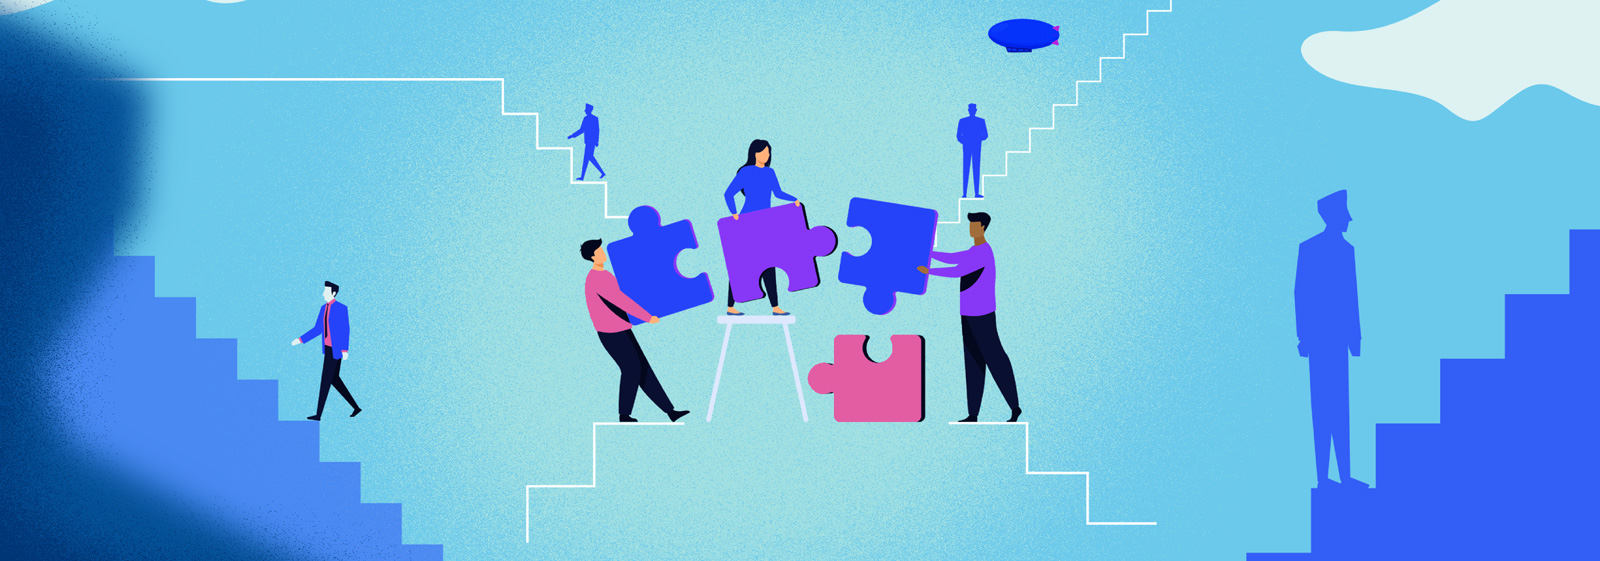 Connection or Information? How to Maximize the Success of Remote Onboarding